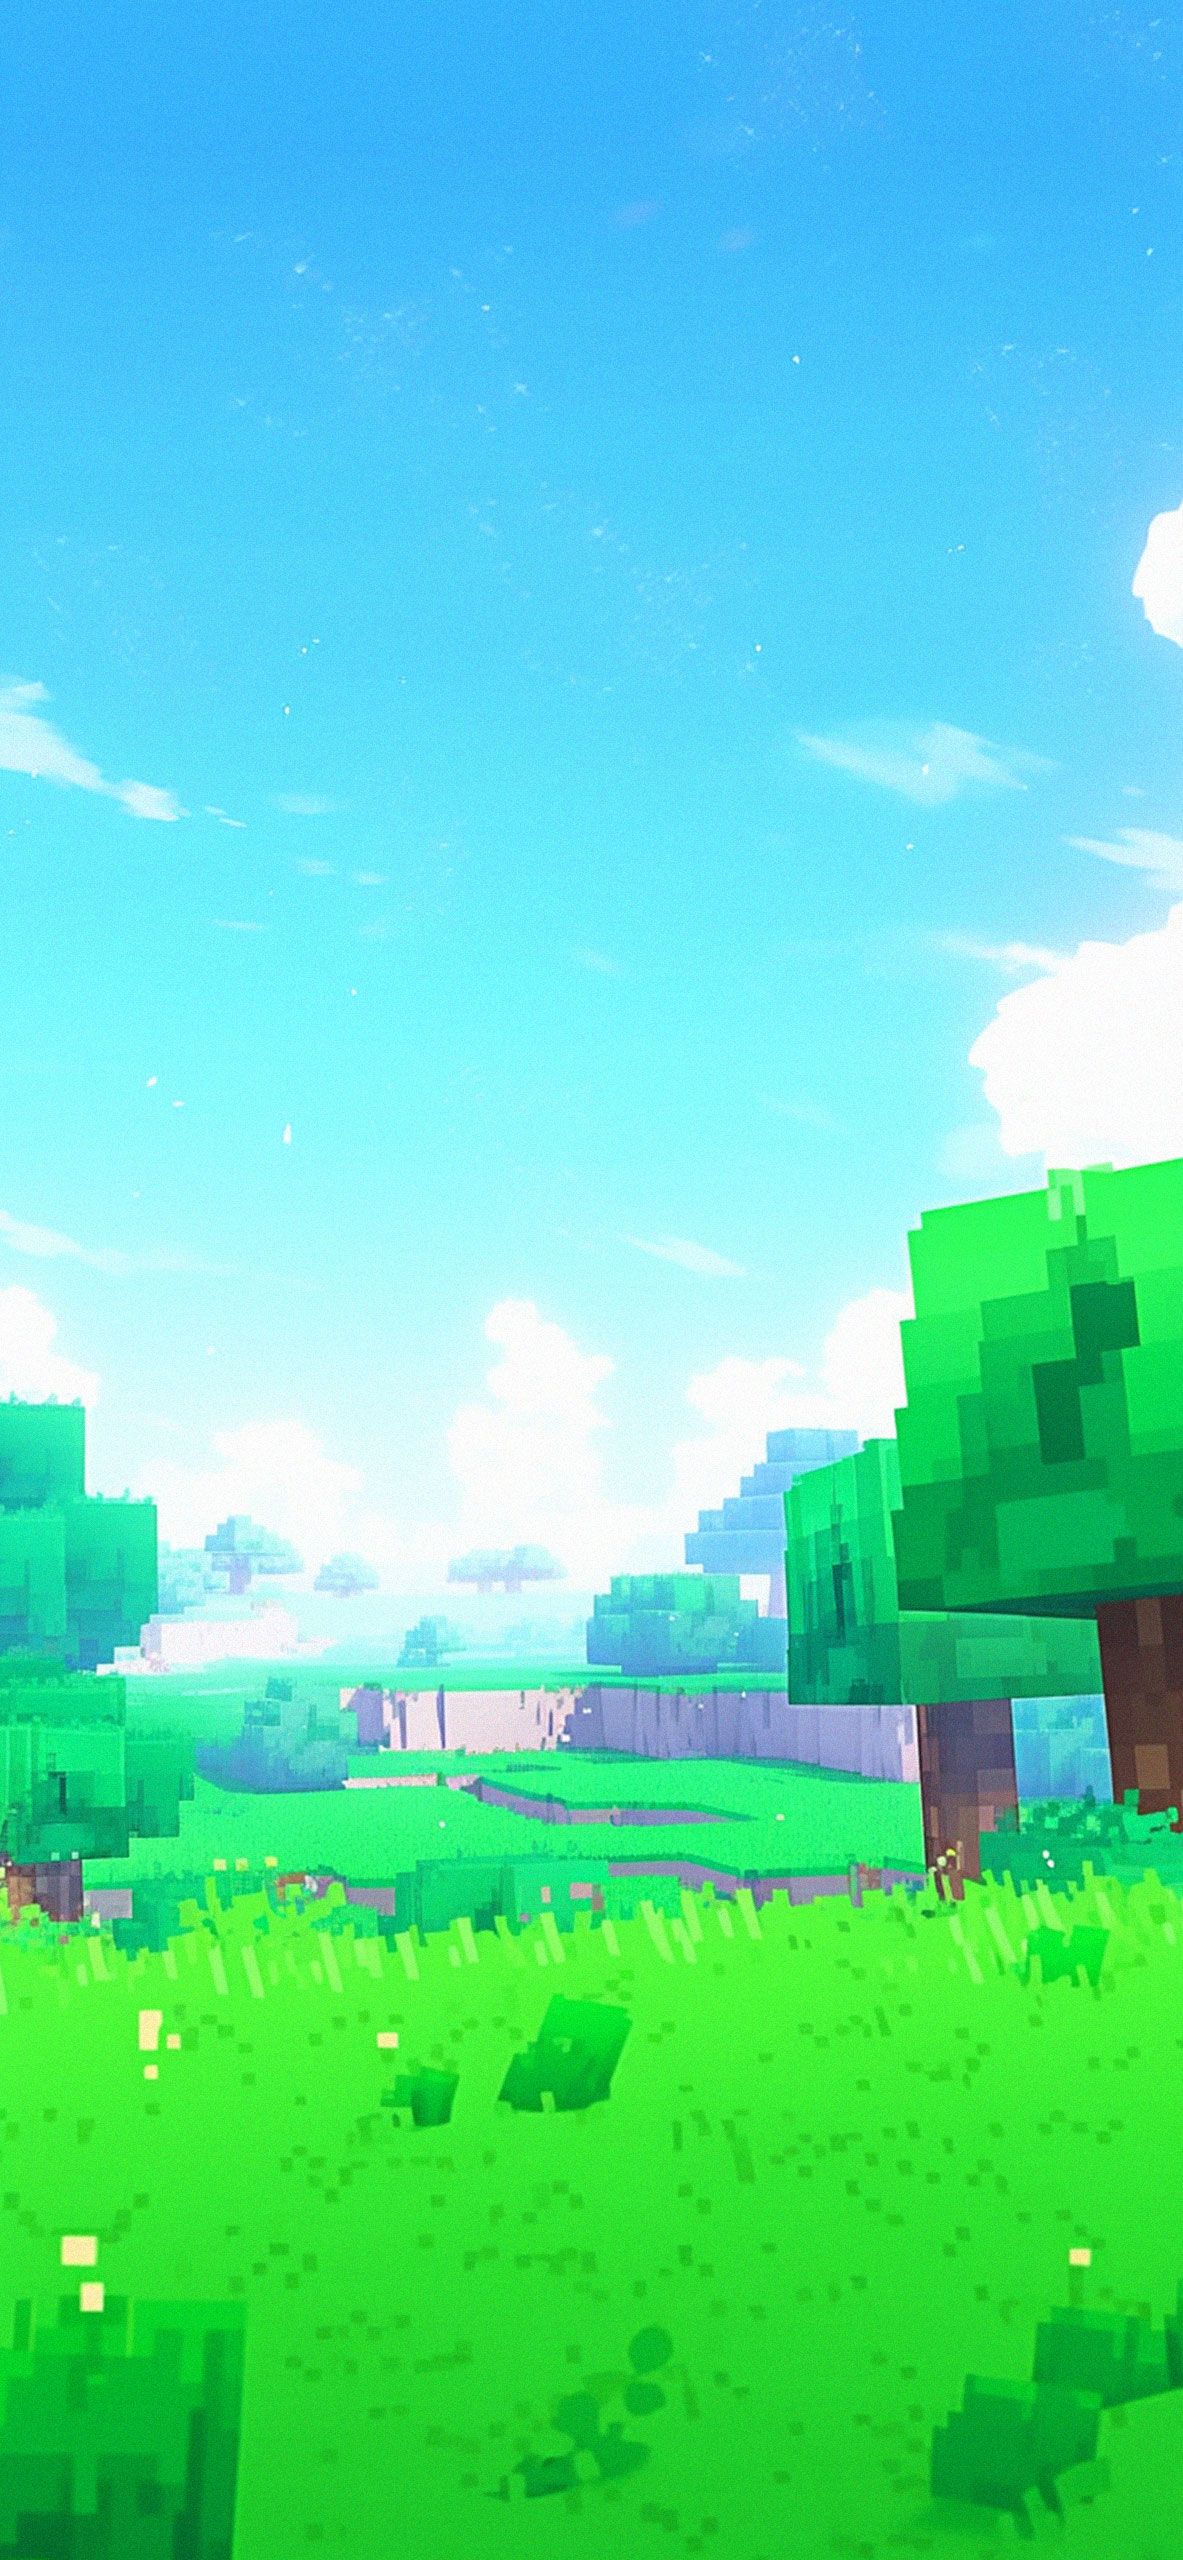 Minecraft wallpaper for your phone! - Android, Minecraft